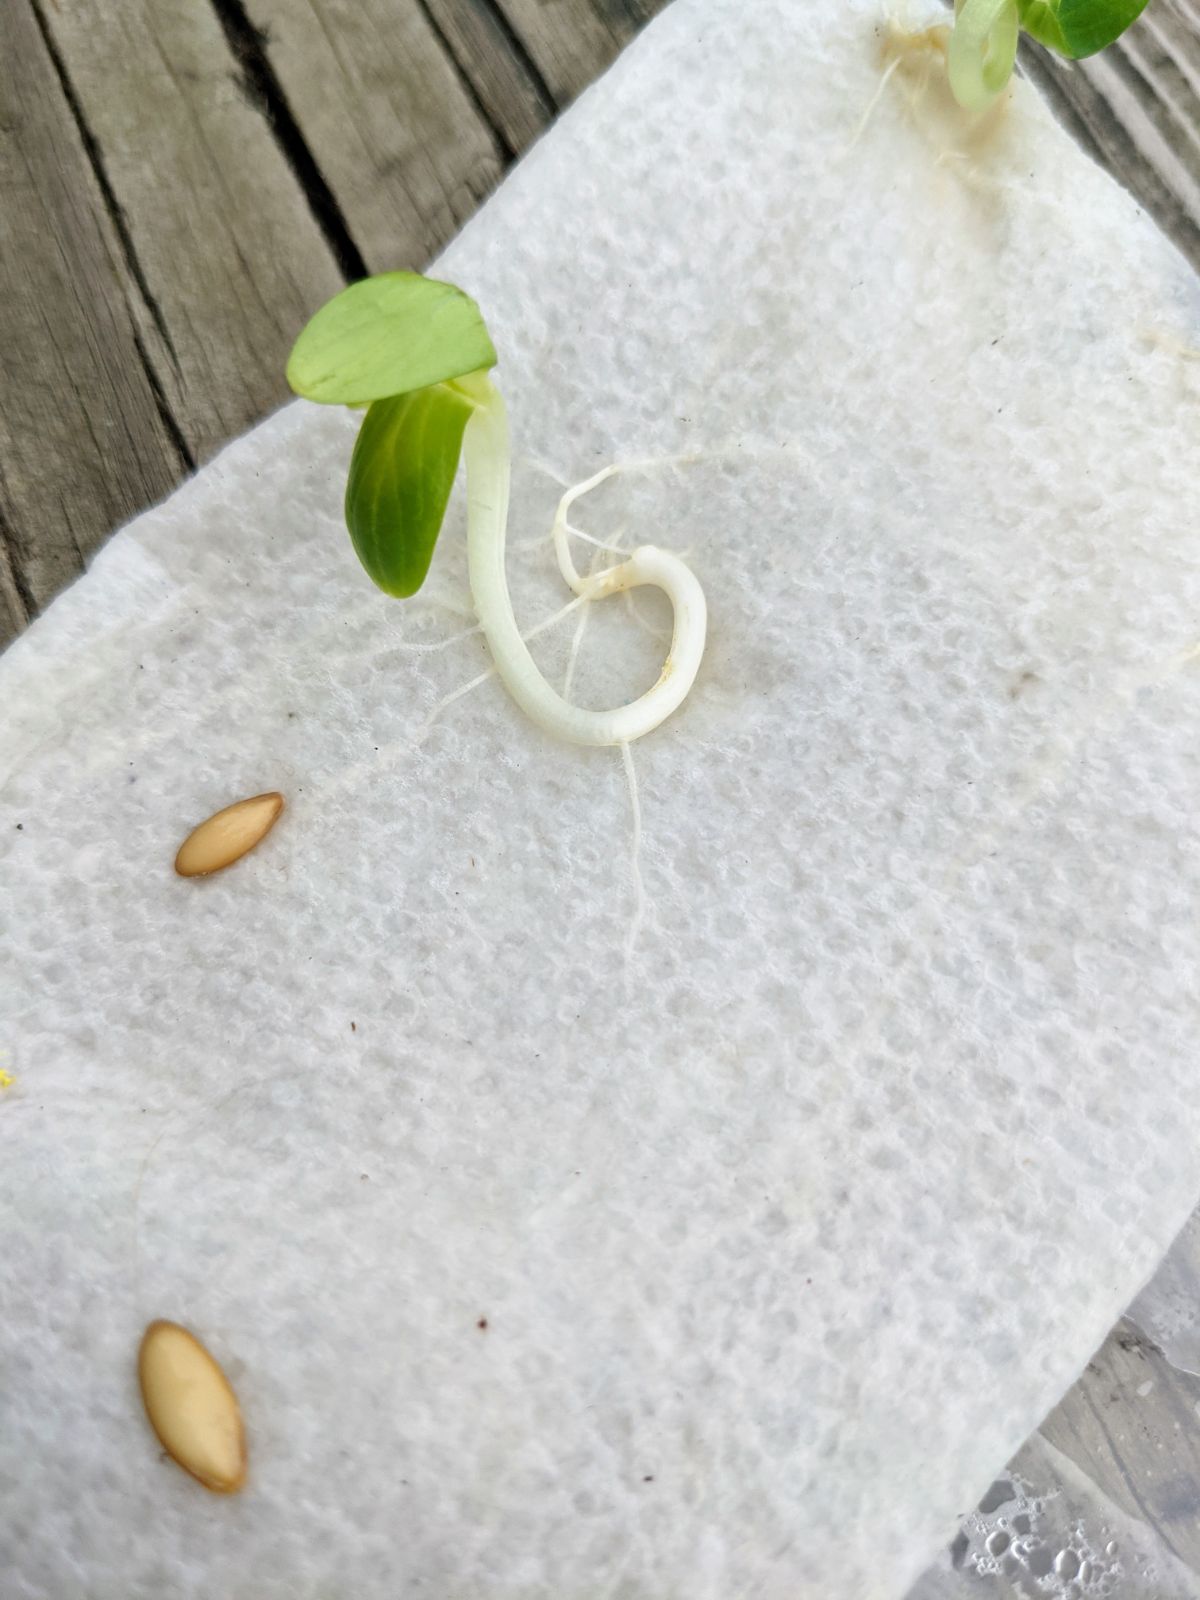 Cucumber seedling with roots embedded in paper towel